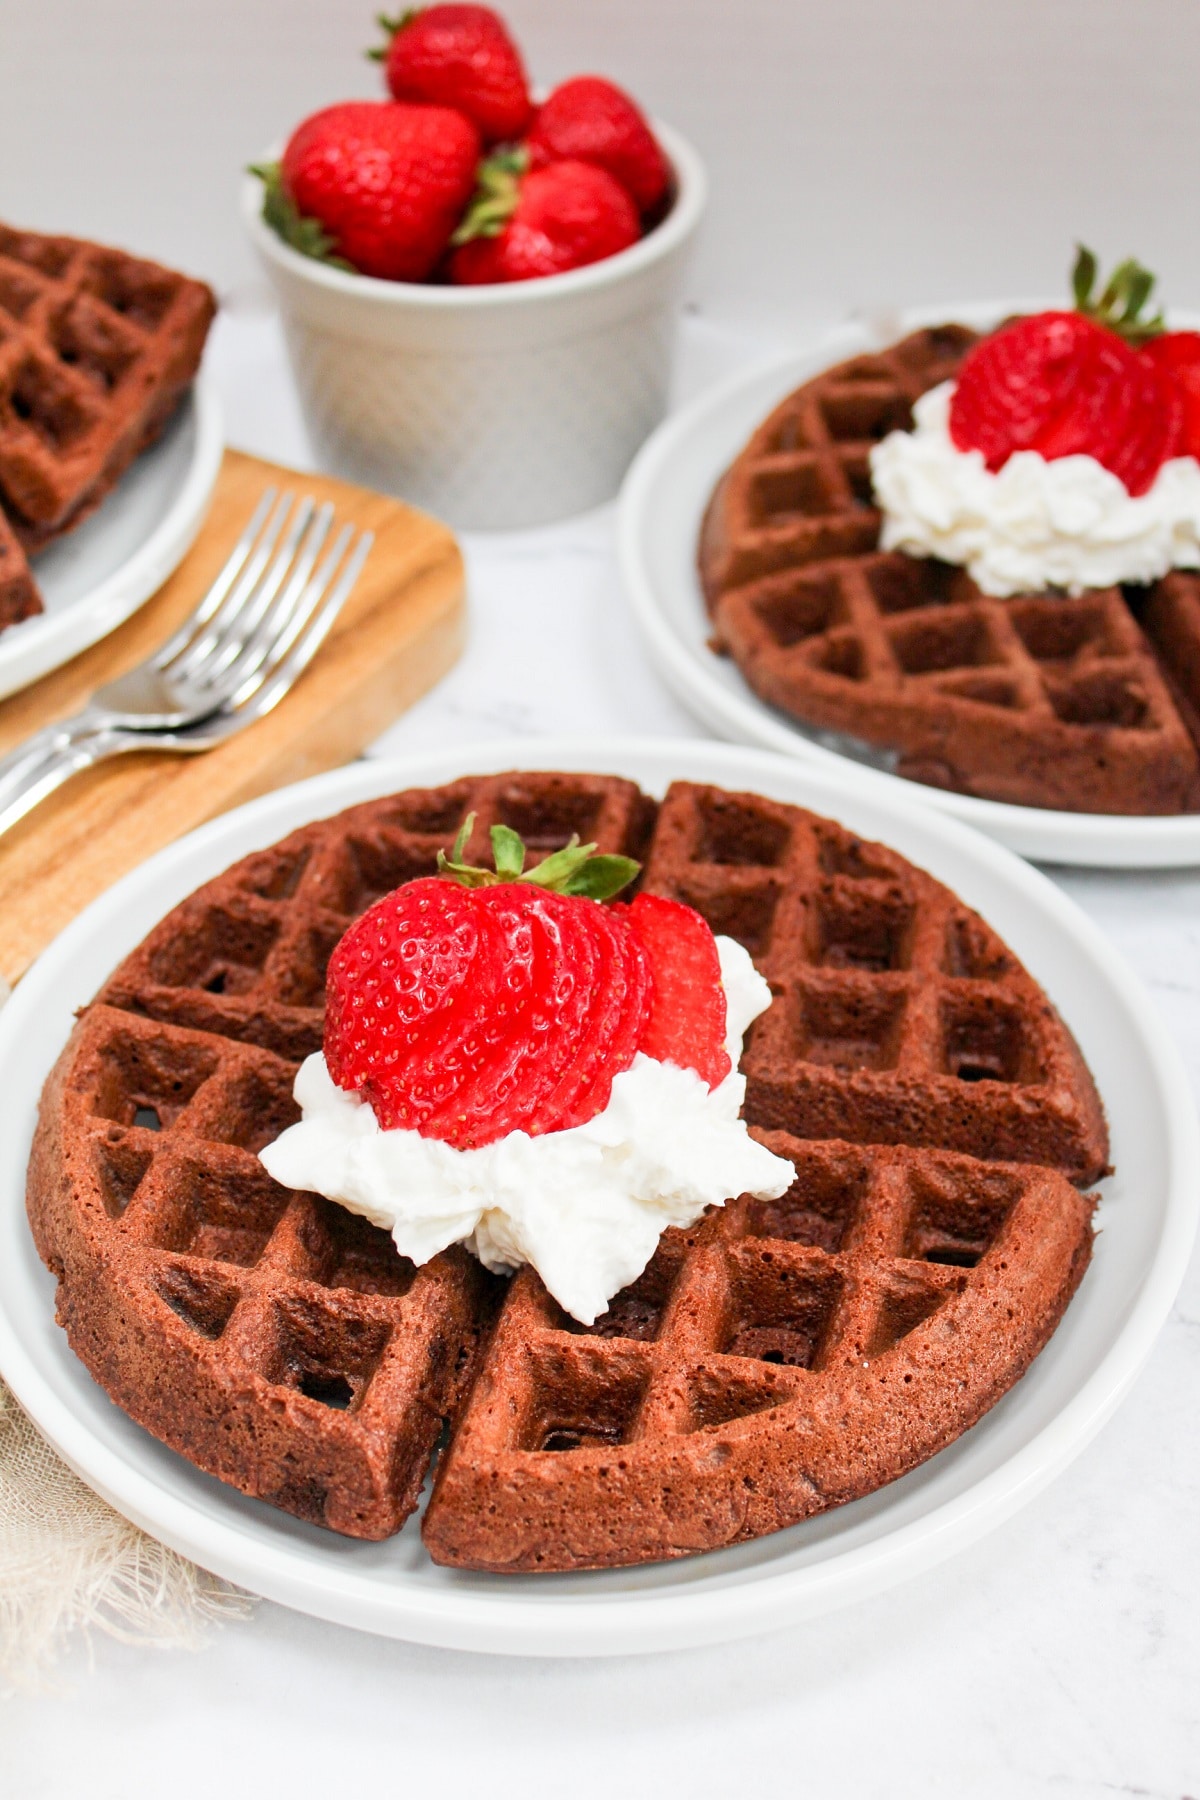 Brownie mix waffles with whipped cream and strawberries on top on a white plate with a plate of waffles in the background